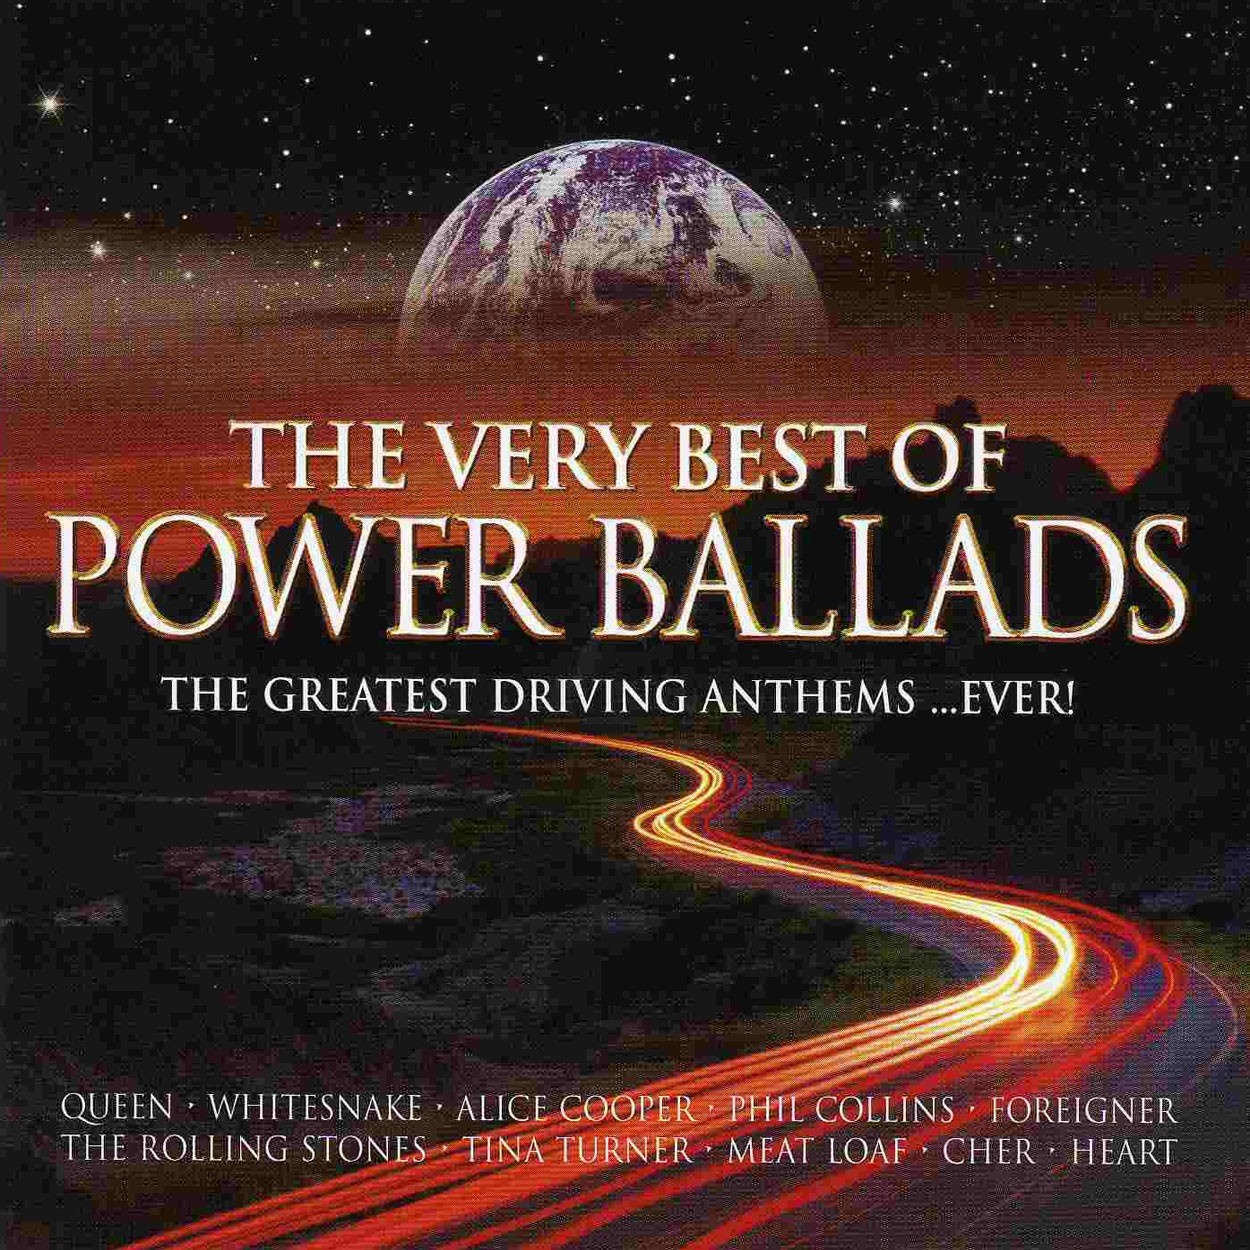 The Very Best of Power Ballads: The Greatest Driving Anthems ...Ever!